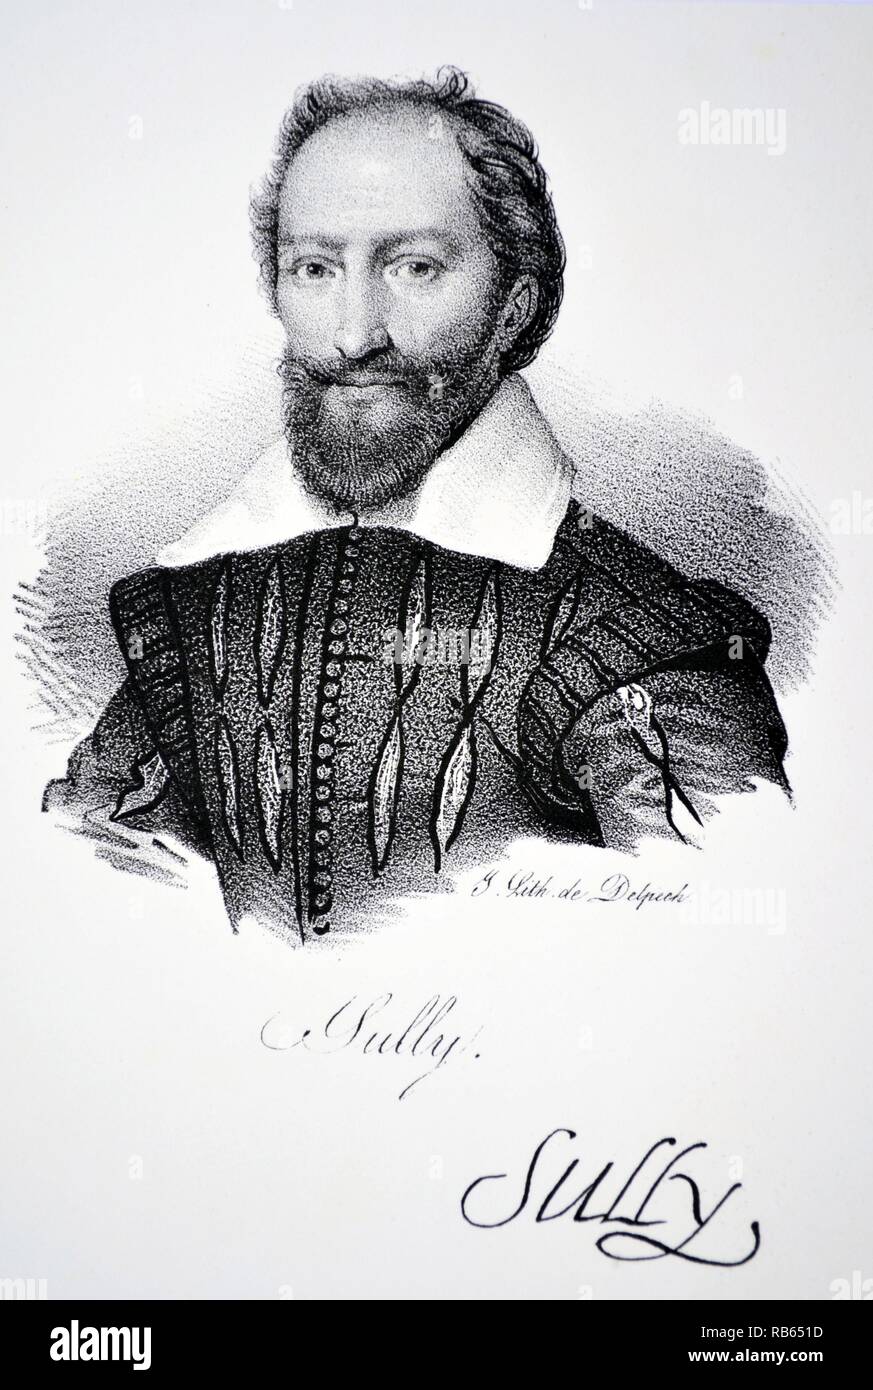 Maximilien de Bethune, 1st Duc de Sully (1560-1641) French Huguenot (Protestant) soldier and minister under Henry IV. LIthograph, Pa;ris, 1832. Stock Photo